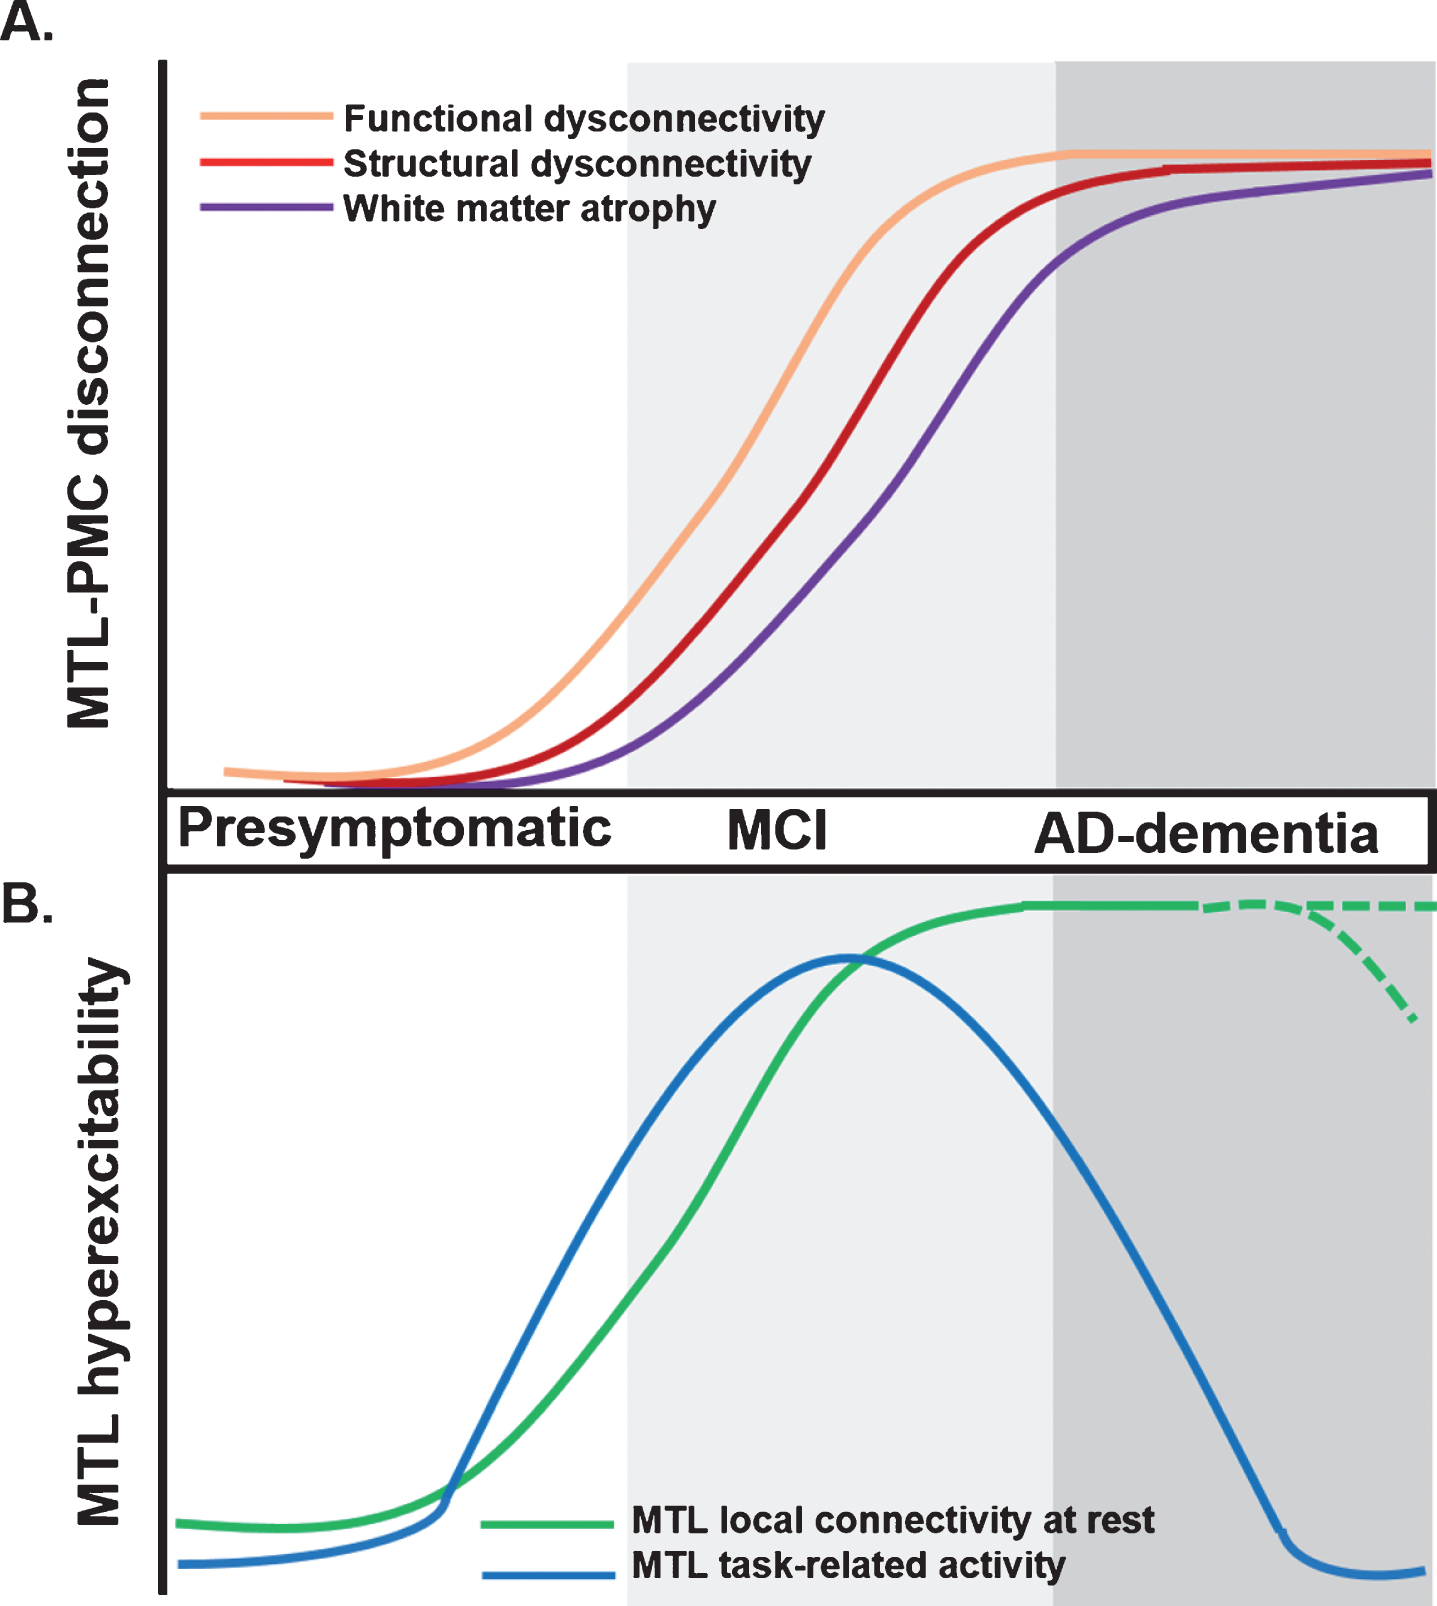 Proposed trajectory for MTL-PMC disconnection and MTL circuit hyperexcitability across clinical stages of AD. A) MTL-PMC disconnection progressively increases across the clinical AD trajectory (indicated by shades of grey), starting with functional (orange curve) and followed by structural dysconnectivity (red) reflecting dysfunctional communication between both regions but not yet extensive neuronal death and degeneration at early AD stages. Functional and structural dysconnectivity are eventually followed by disconnection measured through white matter atrophy reflecting overt degeneration (violet). B) In parallel to ongoing MTL-PMC disconnection, local MTL functional hyperexcitability takes place across stages of AD. On the one hand, task-related MTL activity follows an inverse-U-shaped activation trajectory, with hyperactivity patterns in early MCI followed by hypoactivity at later disease stages (blue hyperbola). On the other hand, during resting-state conditions the MTL is characterized by progressive local hyperconnectivity across clinical AD stages (green curve). It is currently unknown whether at final stages, MTL hyperconnectivity is sustained or eventually drops due to ongoing MTL degeneration (shaded green lines). AD, Alzheimer’s disease; MCI, mild cognitive impairment; MTL, medial temporal lobes; PMC, parietomedial cortex.